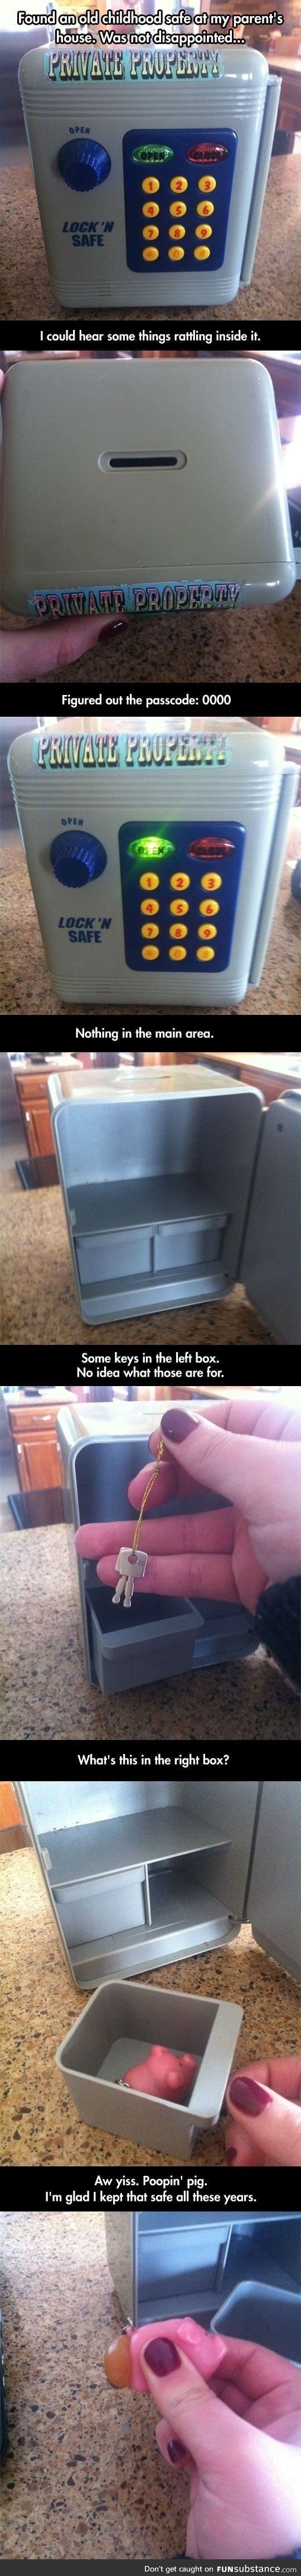 Check this old but amusing childhood safe out